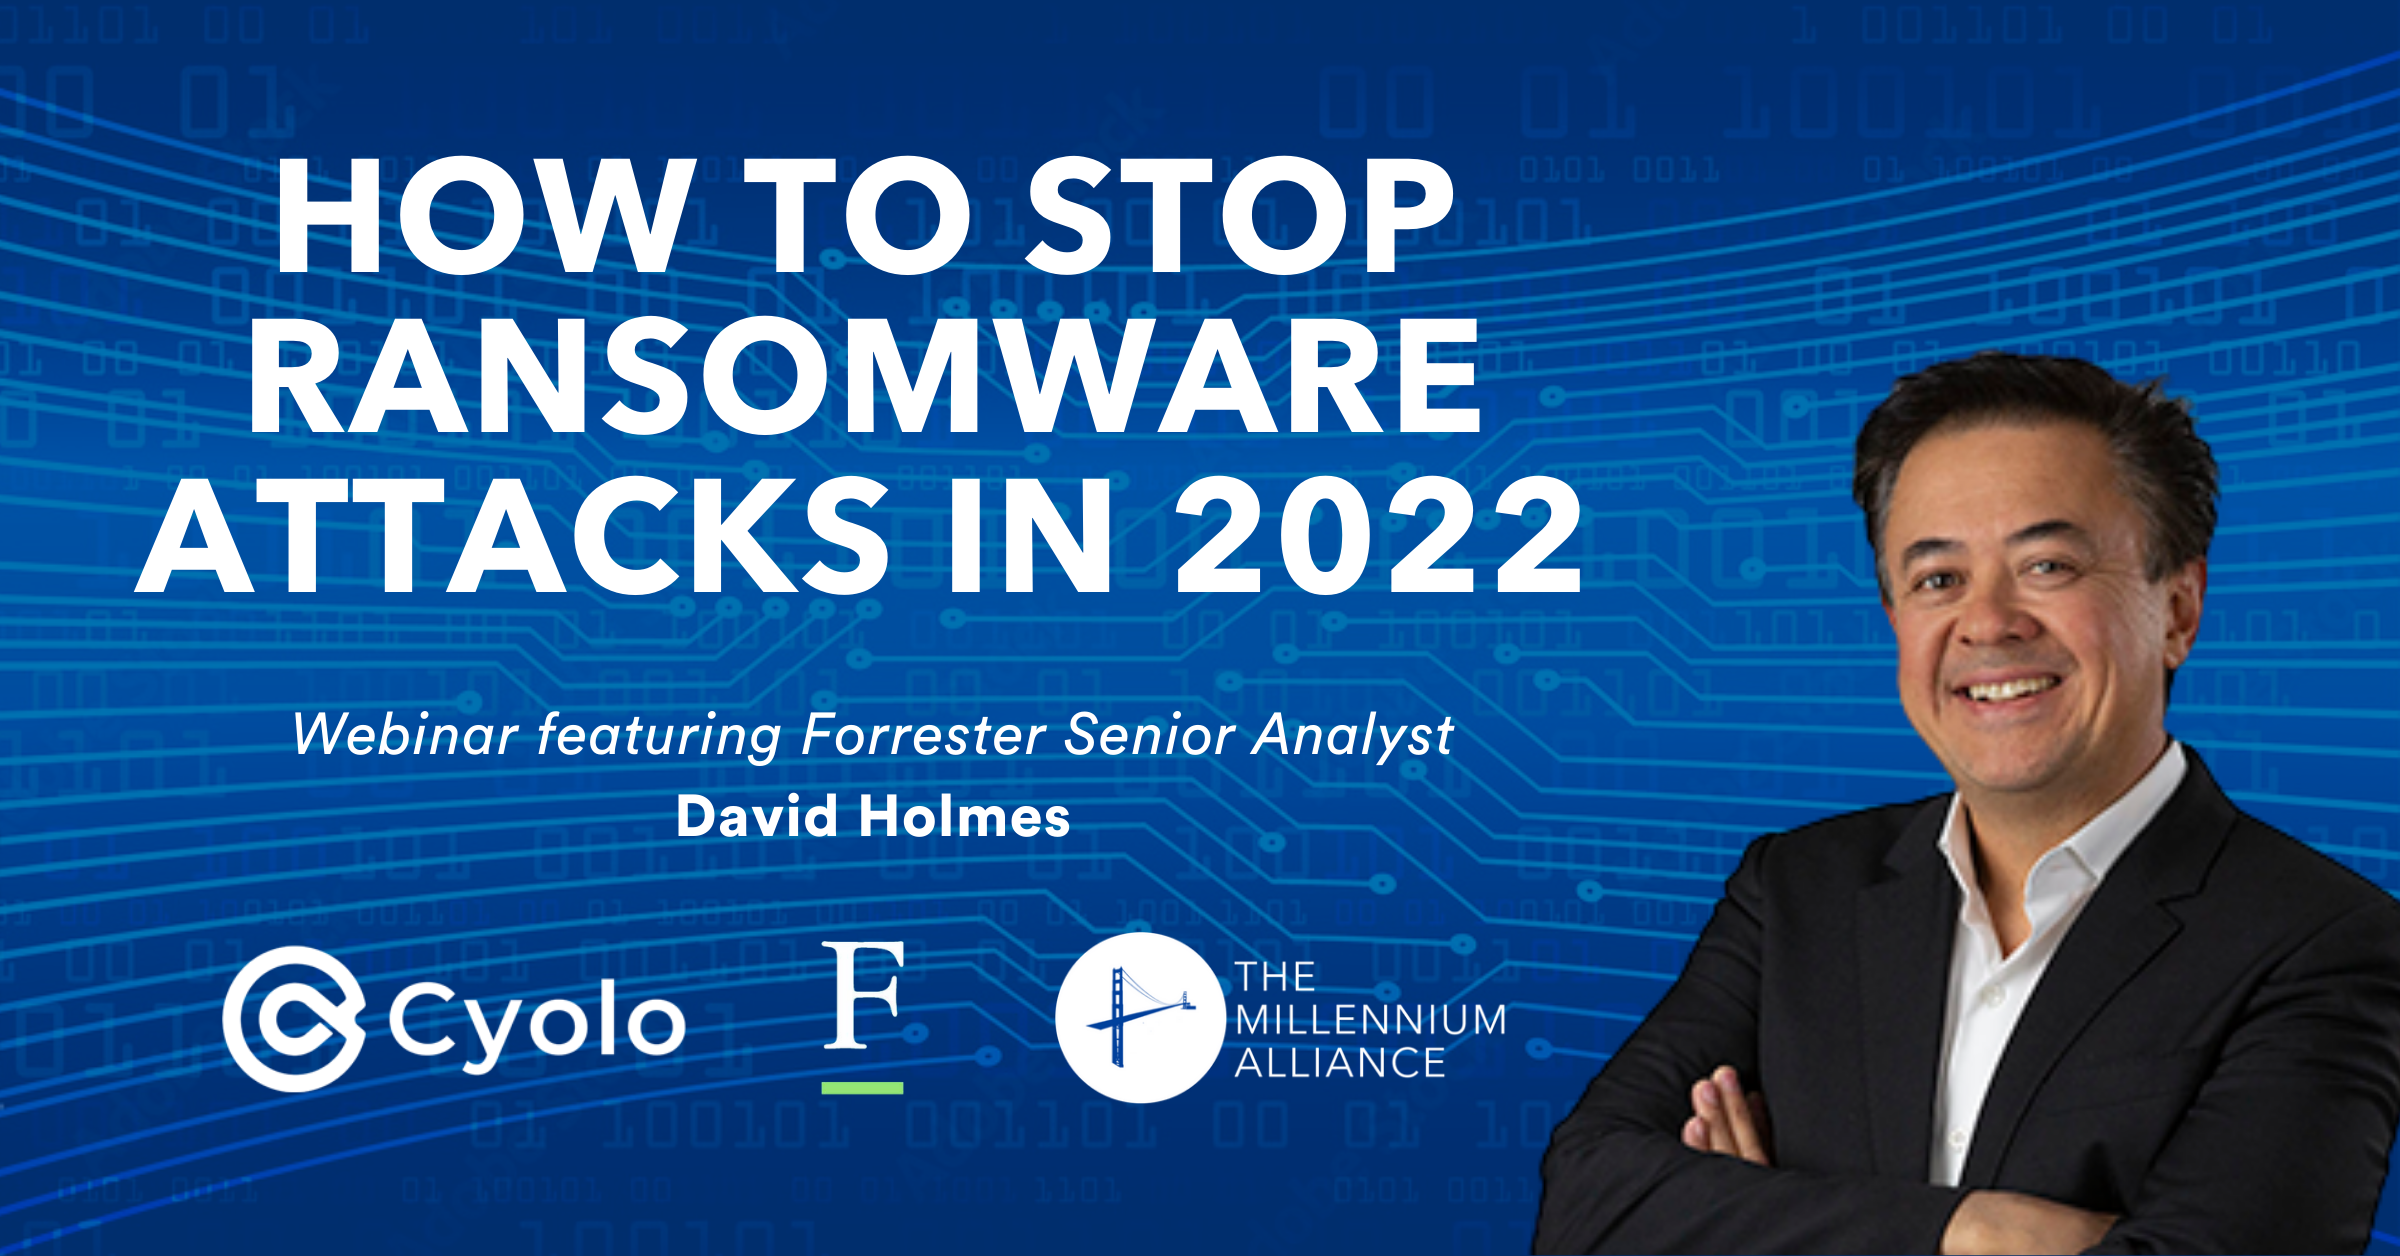 How to Stop Ransomware Attacks in 2022 and Beyond